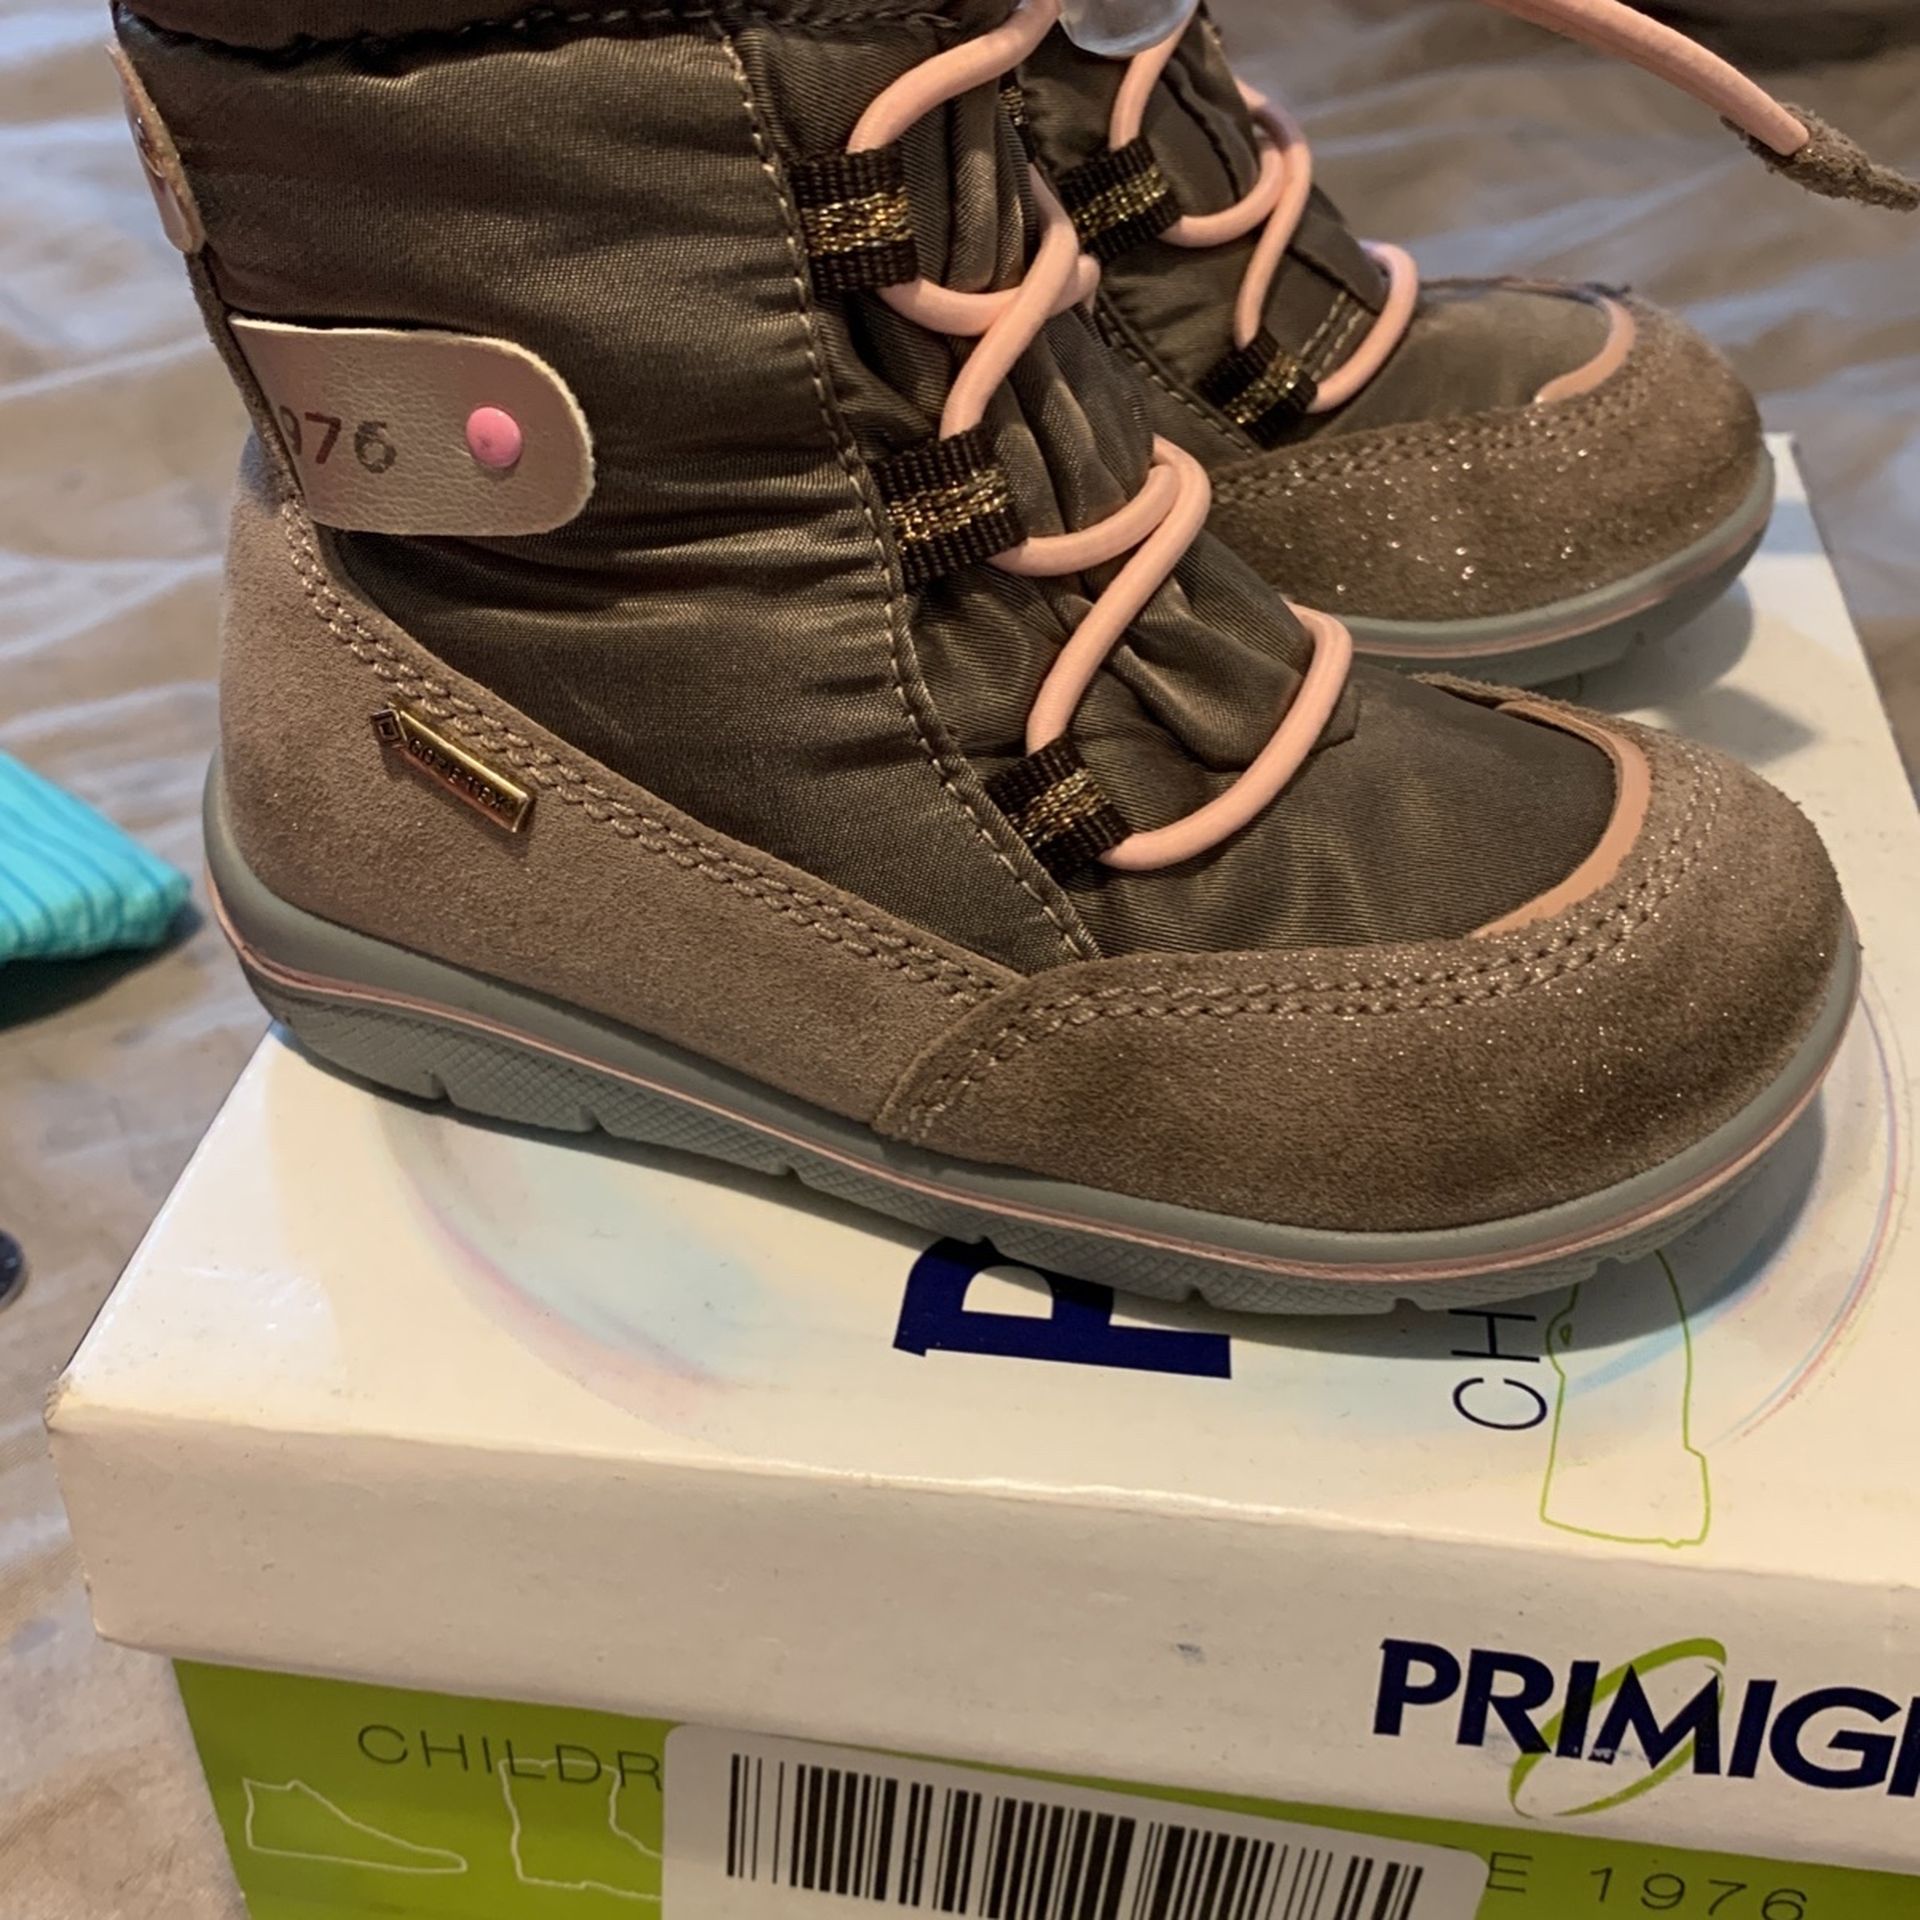 New Toddler Girls Snow Boots